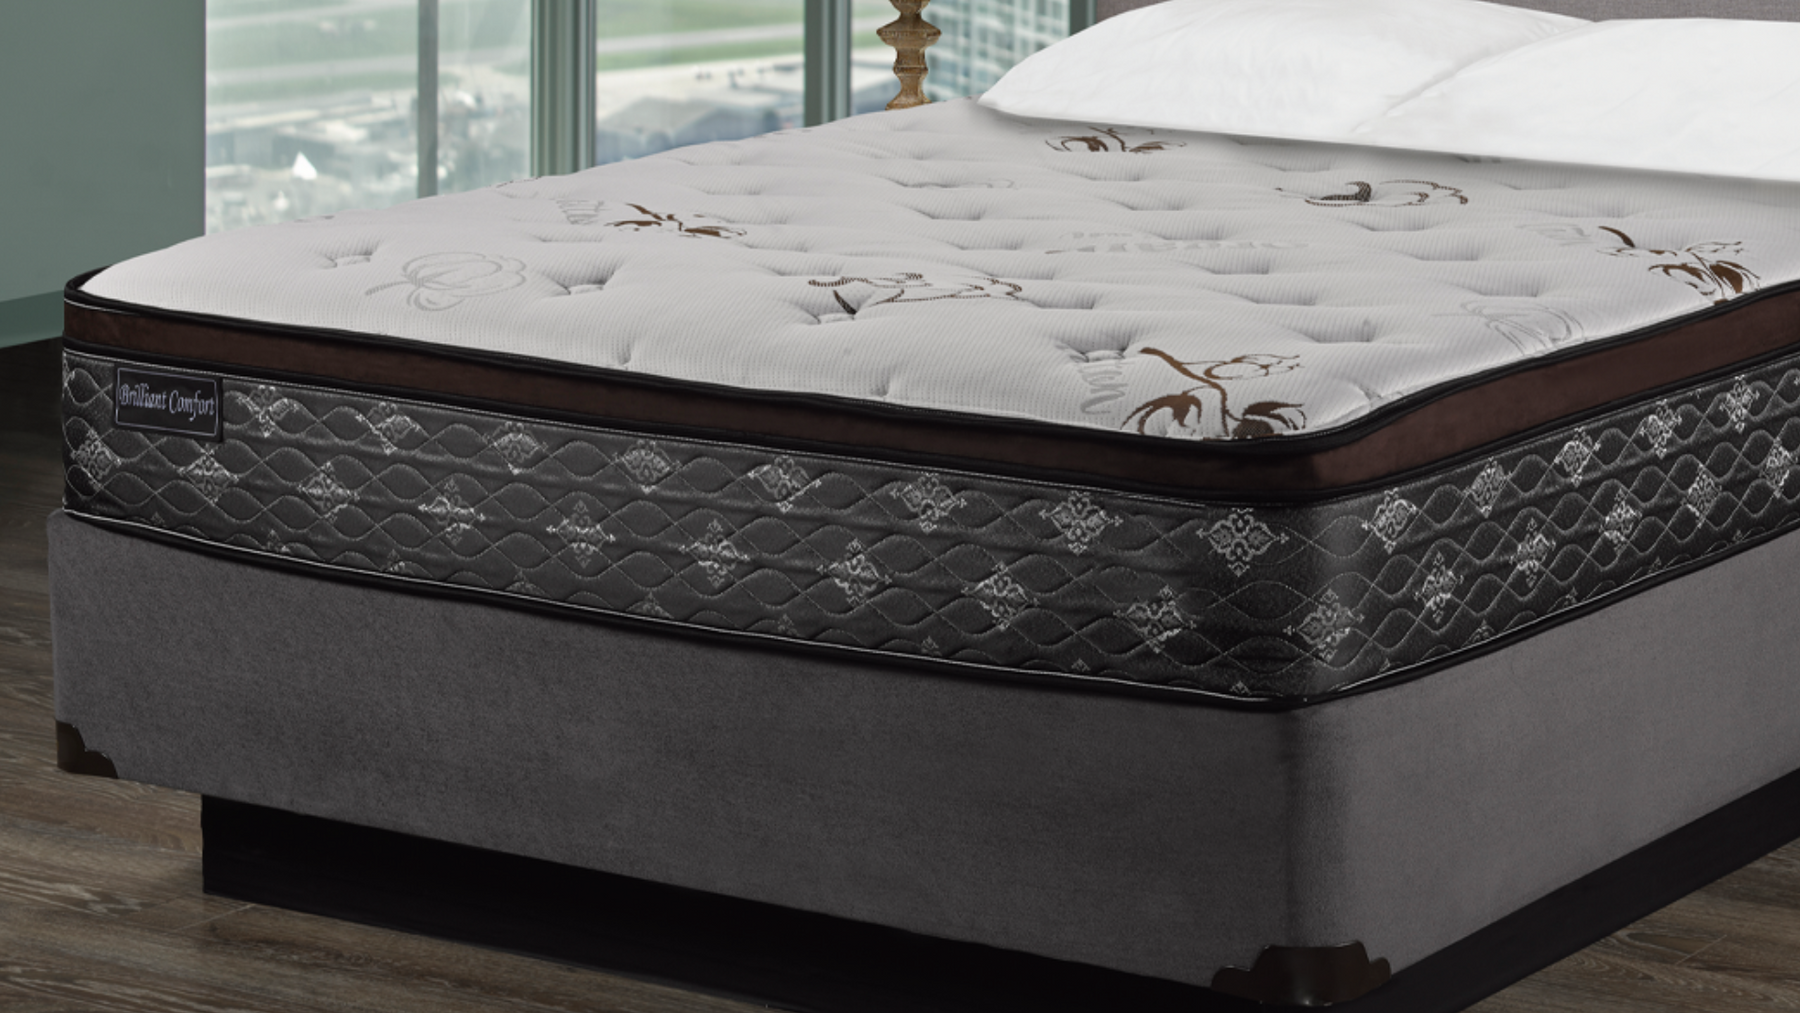 Experience Ultimate Comfort and Support with the Brilliant Comfort Mattress